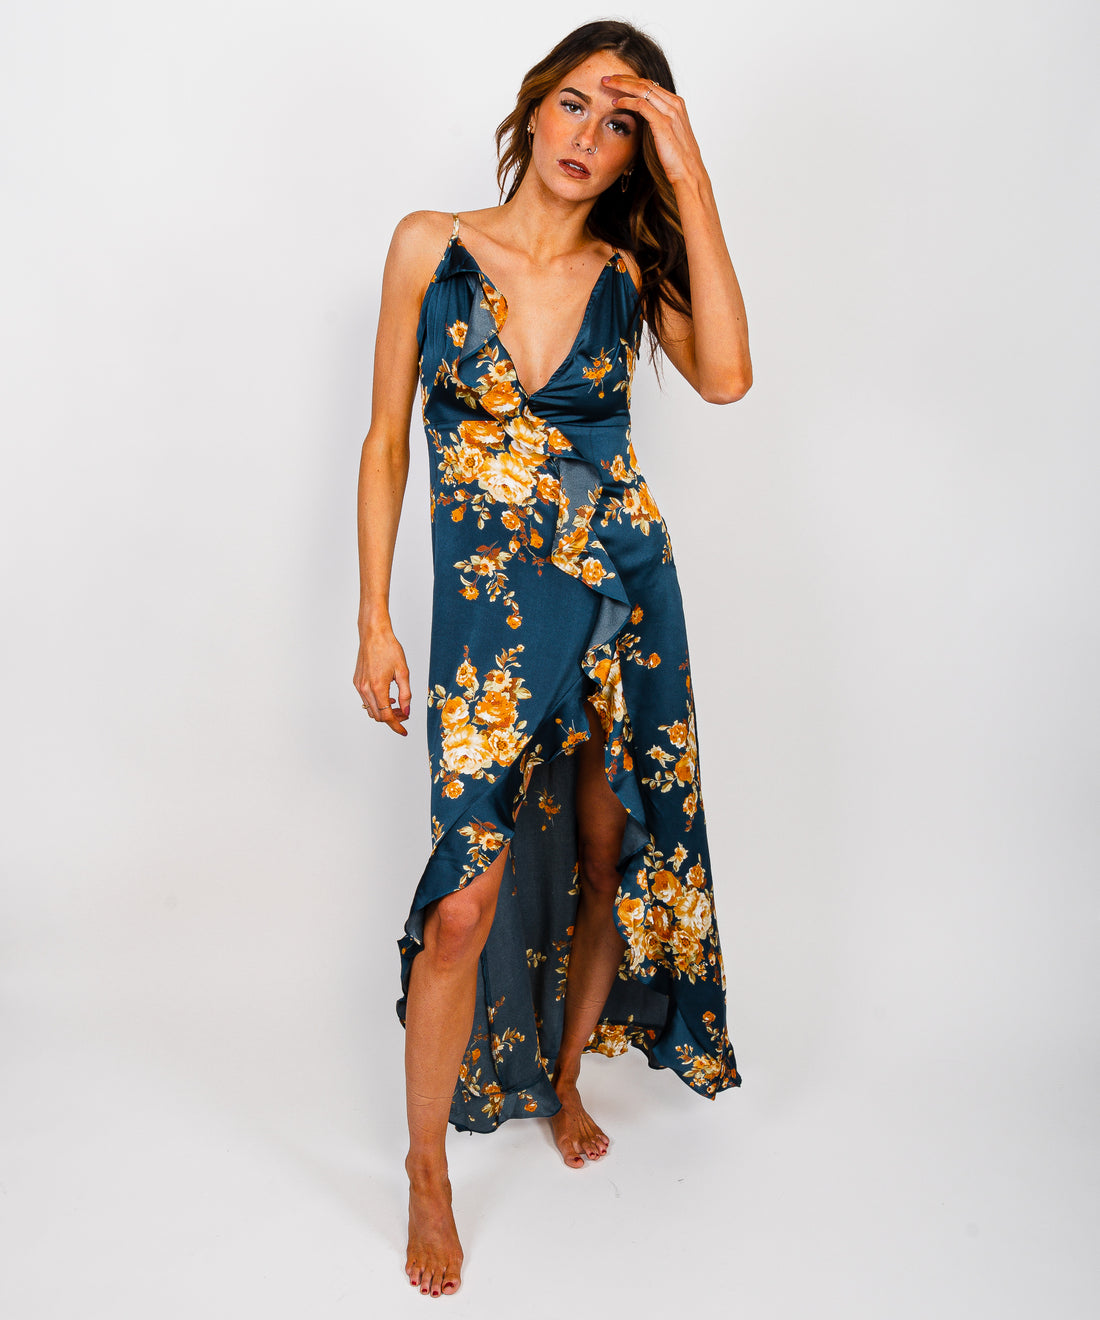 Something About You Satin Floral Ruffle Maxi Dress